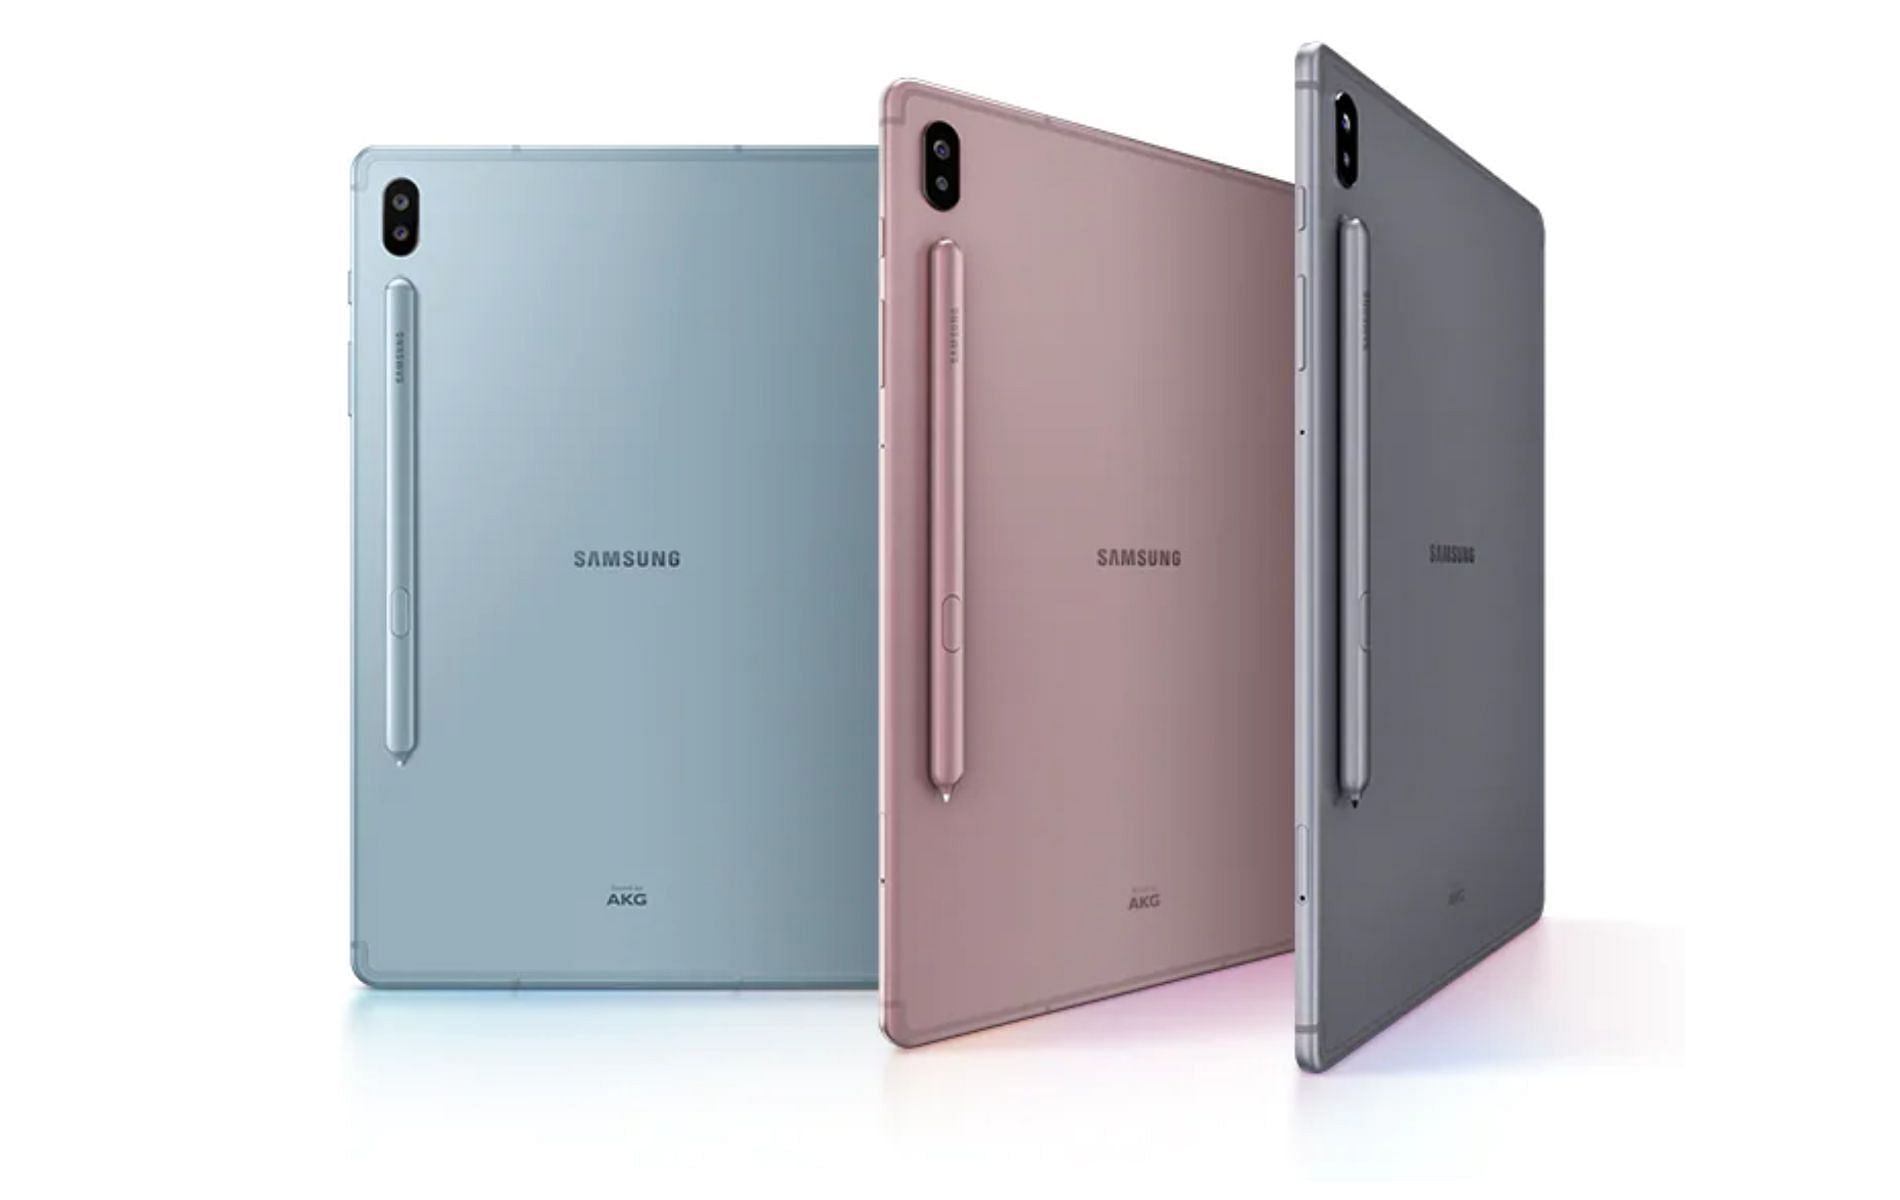 The Samsung Galaxy Tab S6 has lost its luster and relevance in 2023 (Image via Samsung)